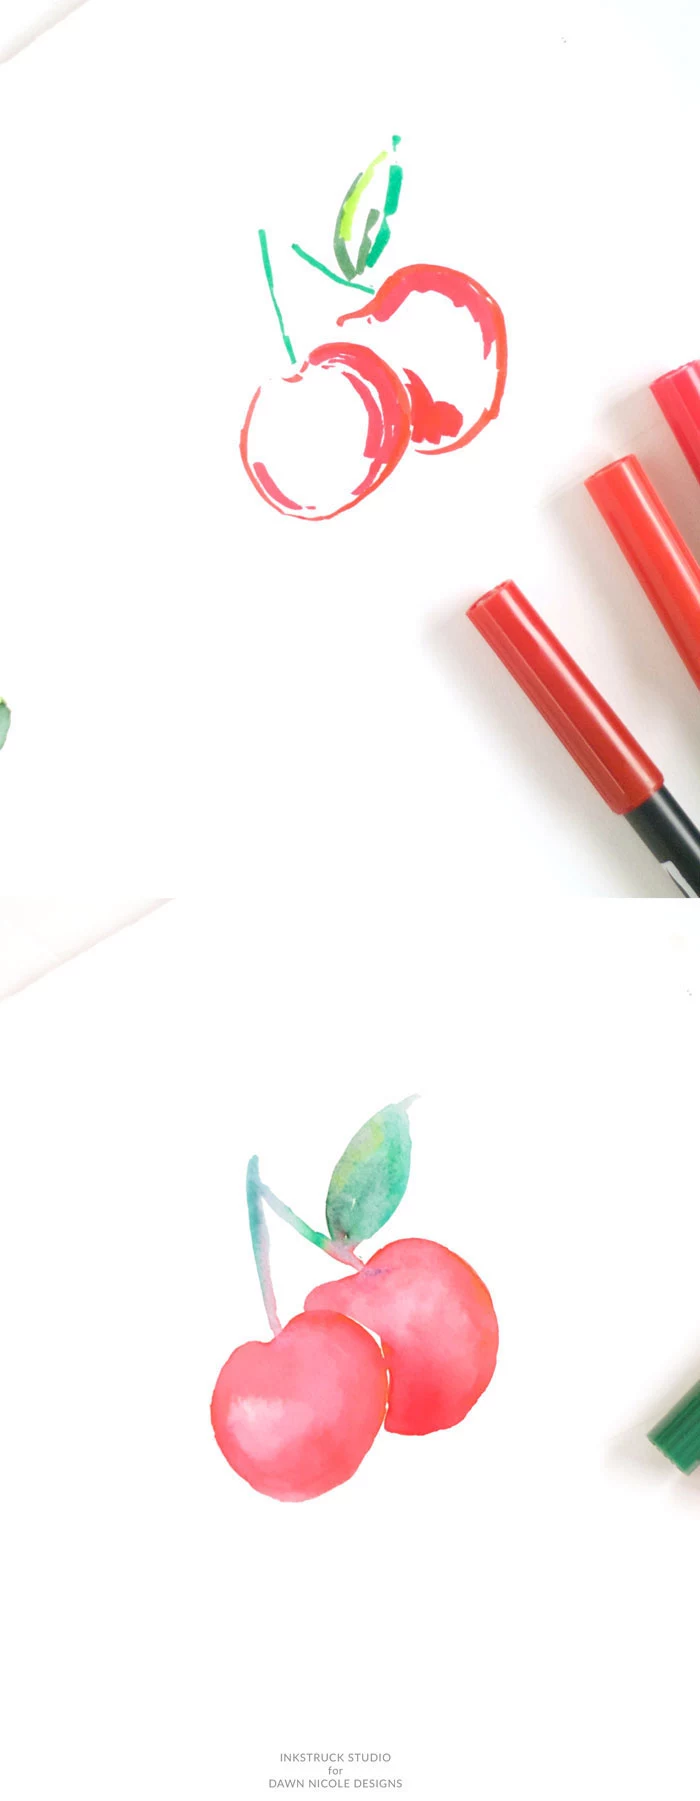 how to draw a cherry, step by step, diy tutorial, images to draw, red markers